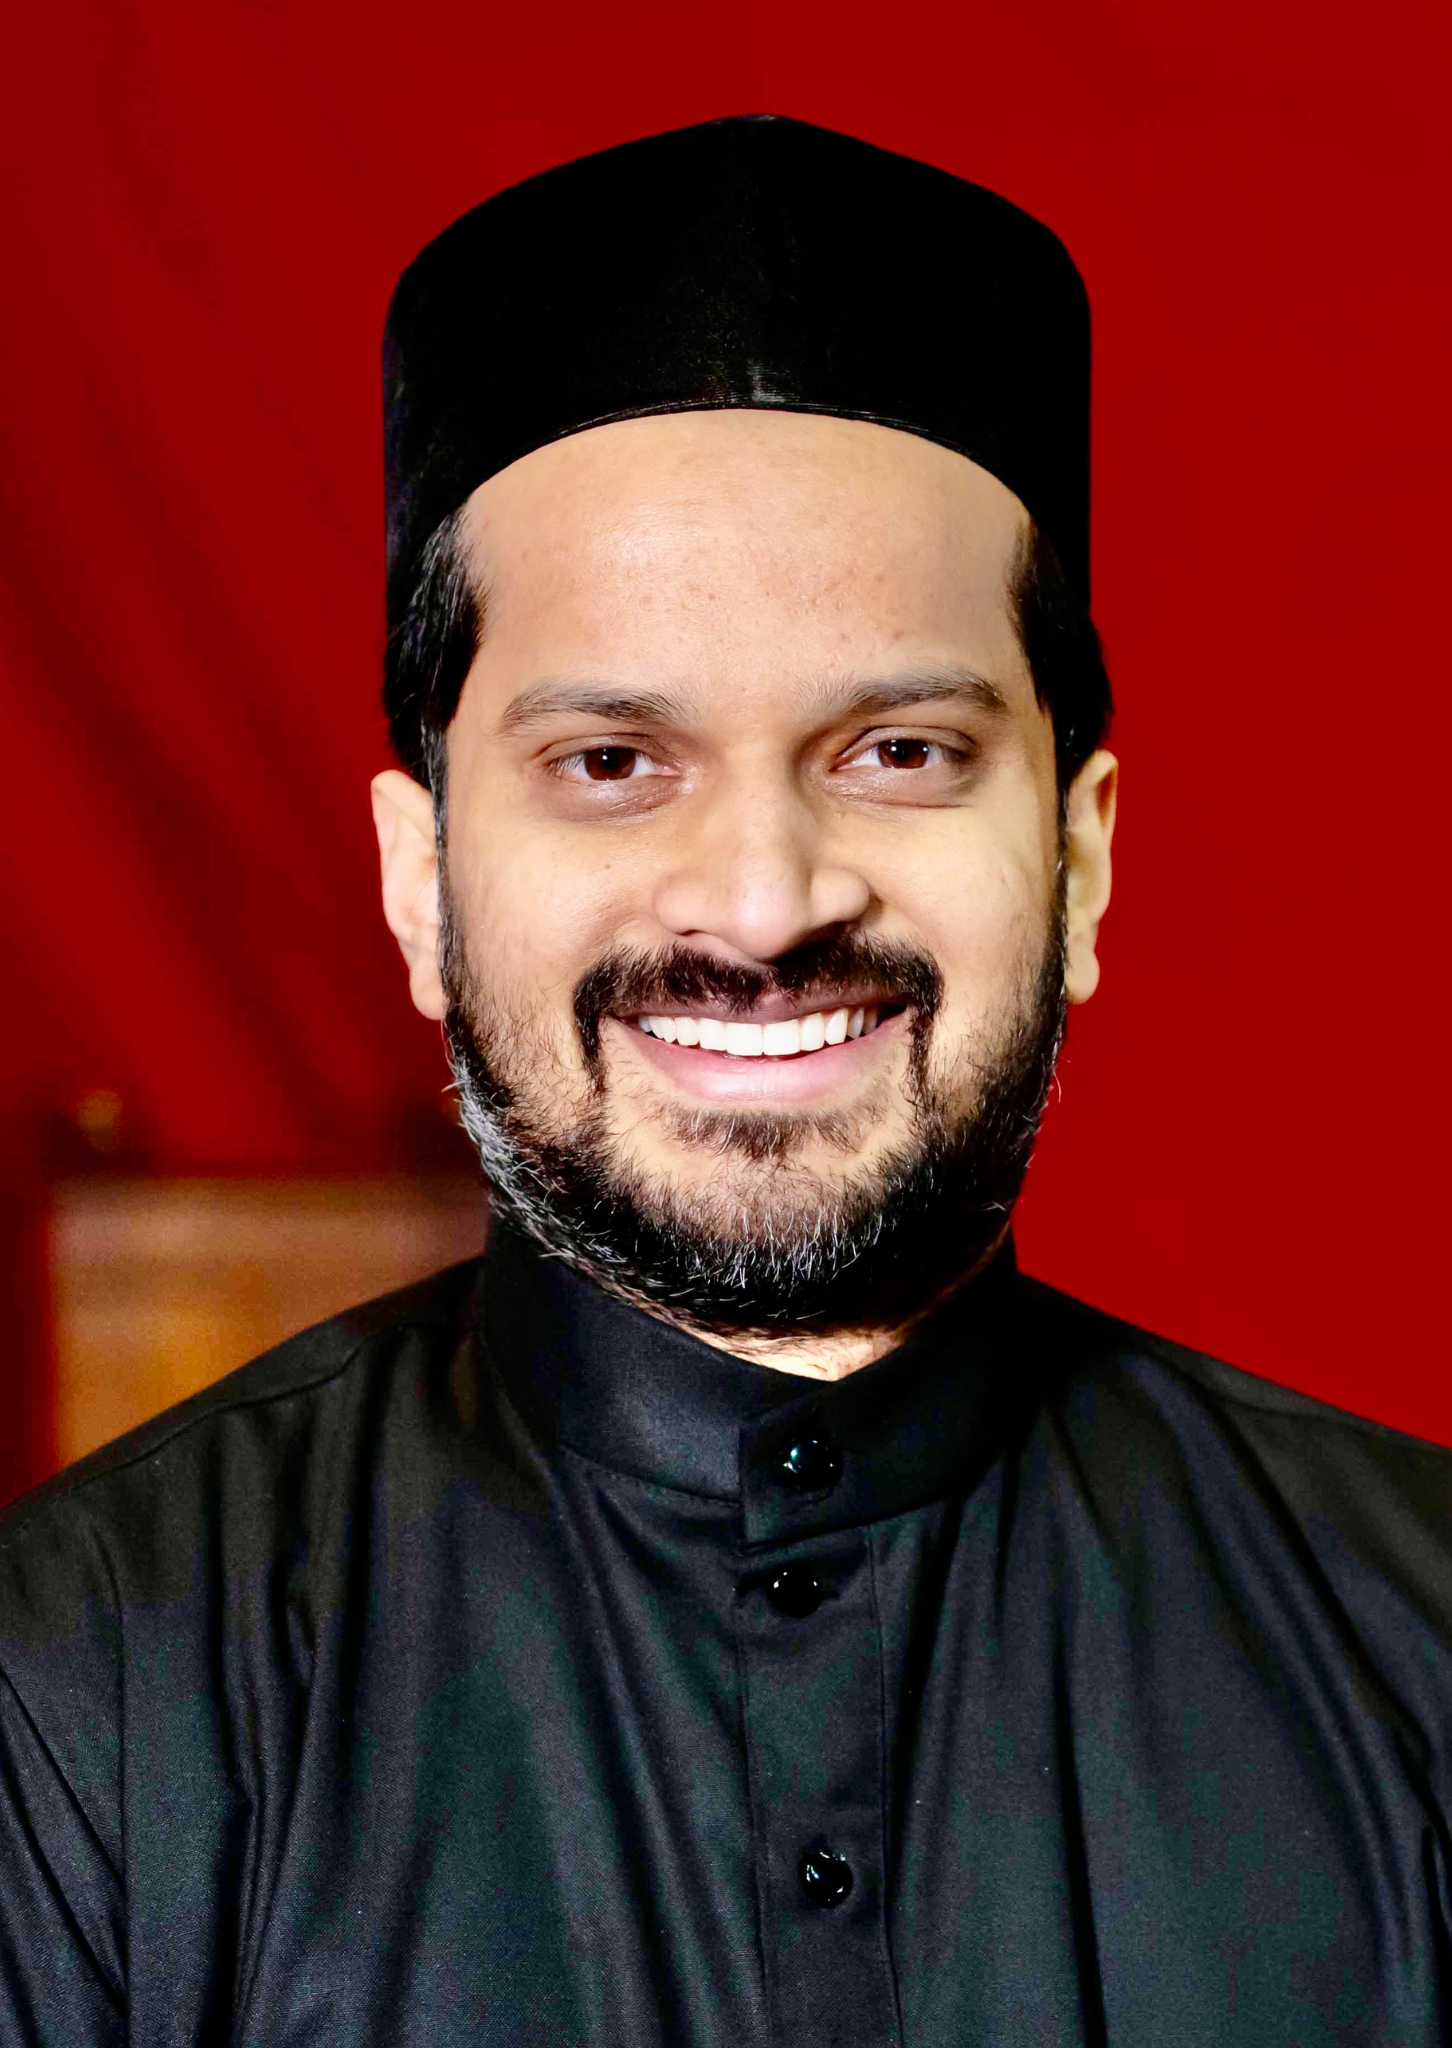 A smiling man in his all black priestly Indian Orthodox garb